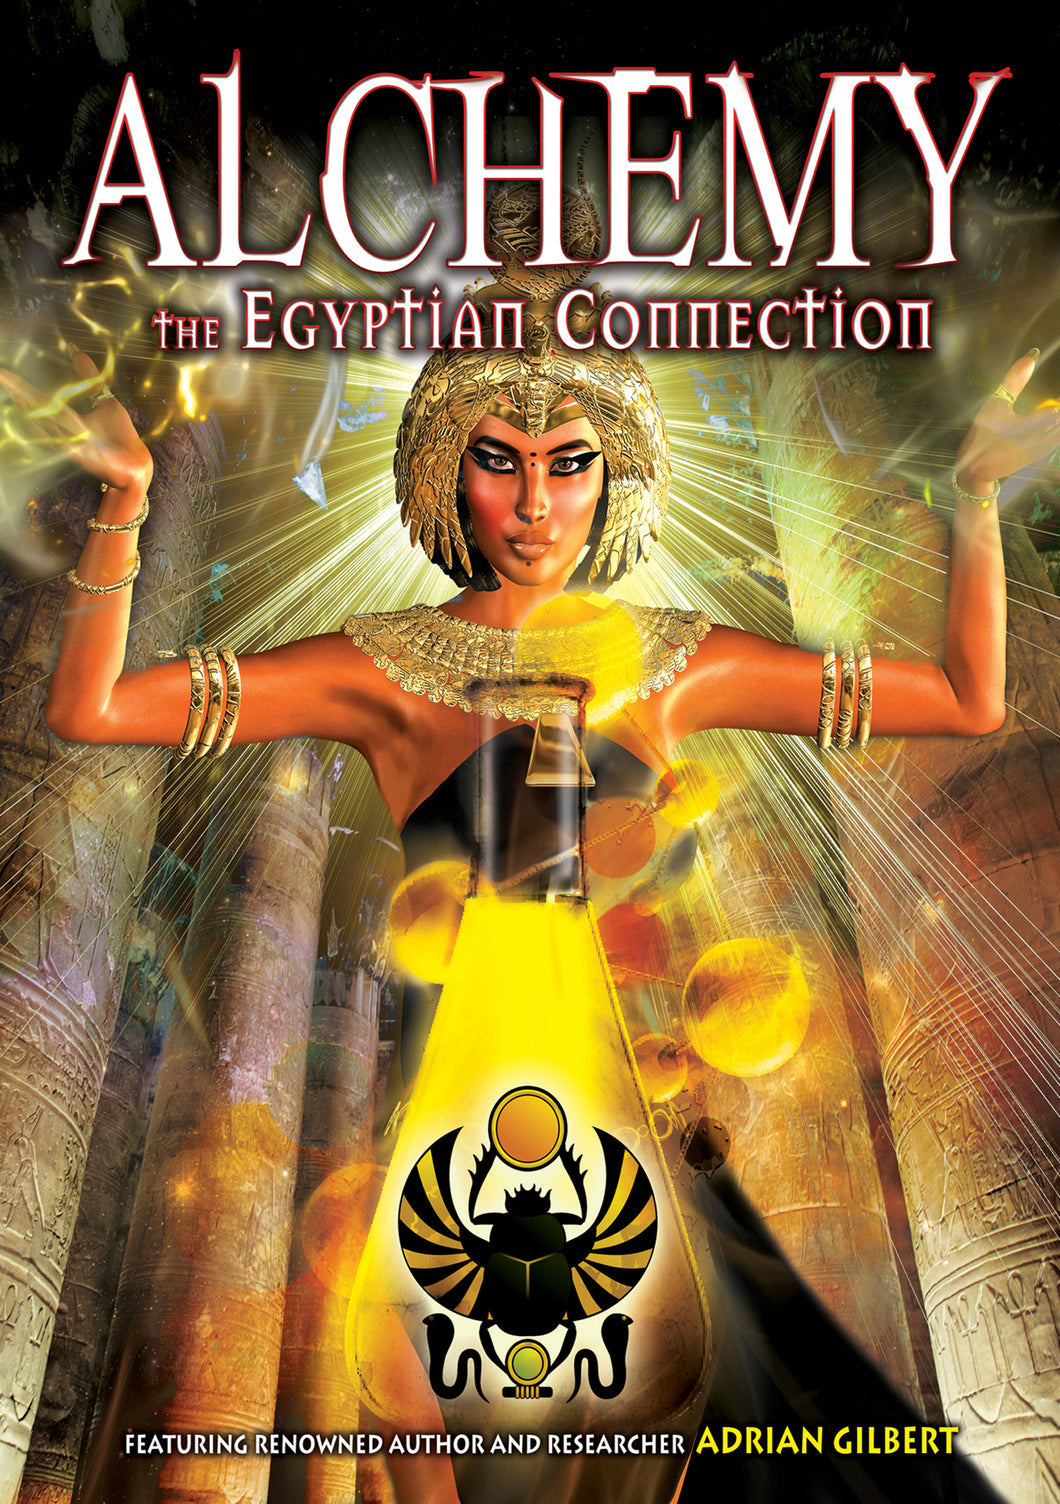 Alchemy: The Egyptian Connection (DVD)